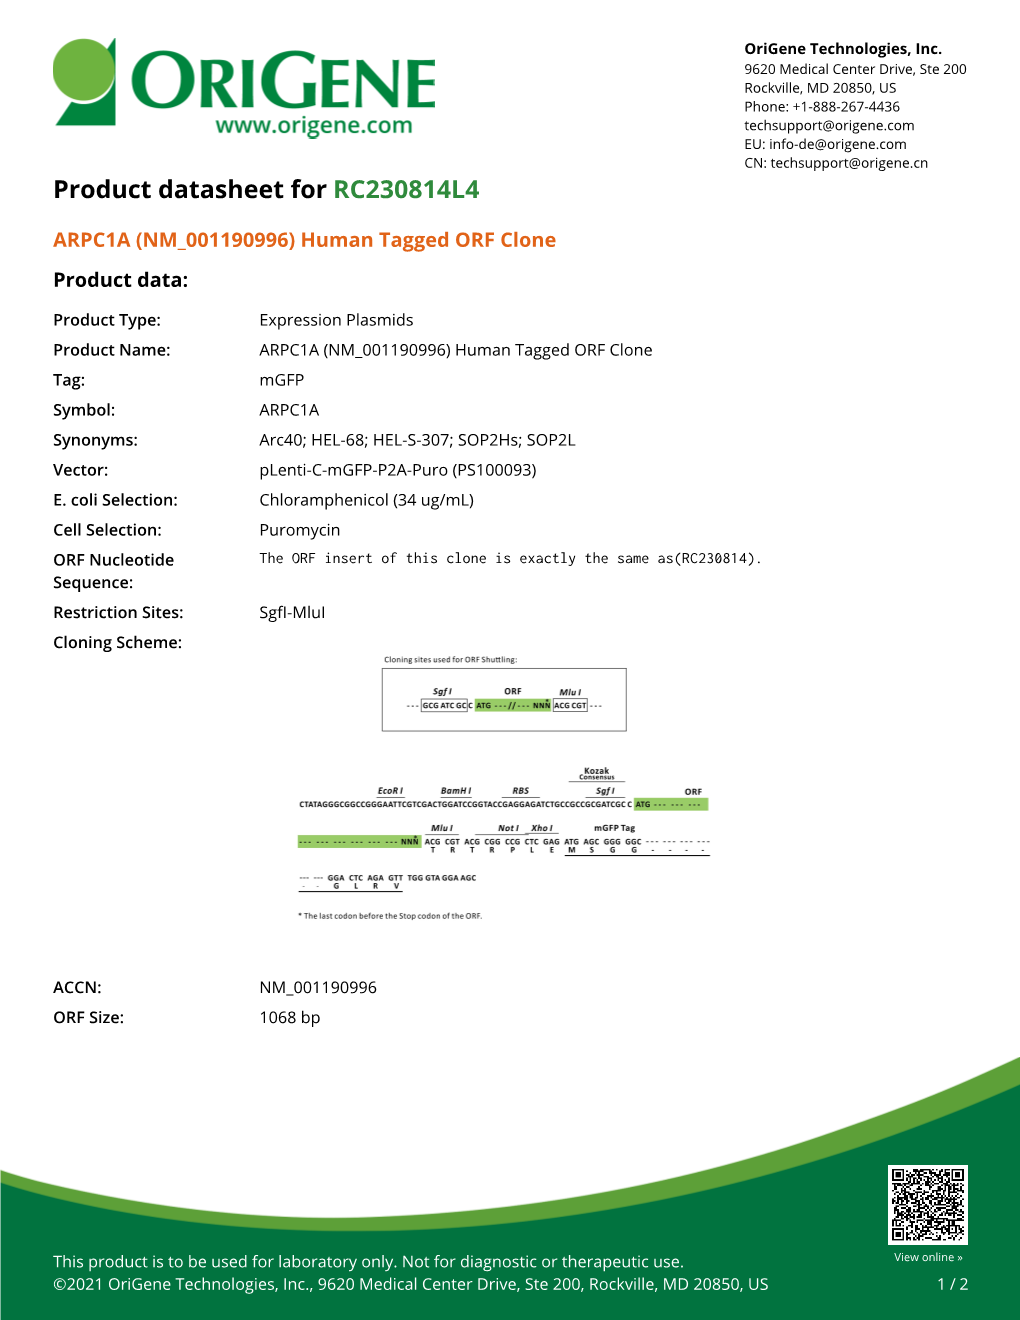 ARPC1A (NM 001190996) Human Tagged ORF Clone Product Data